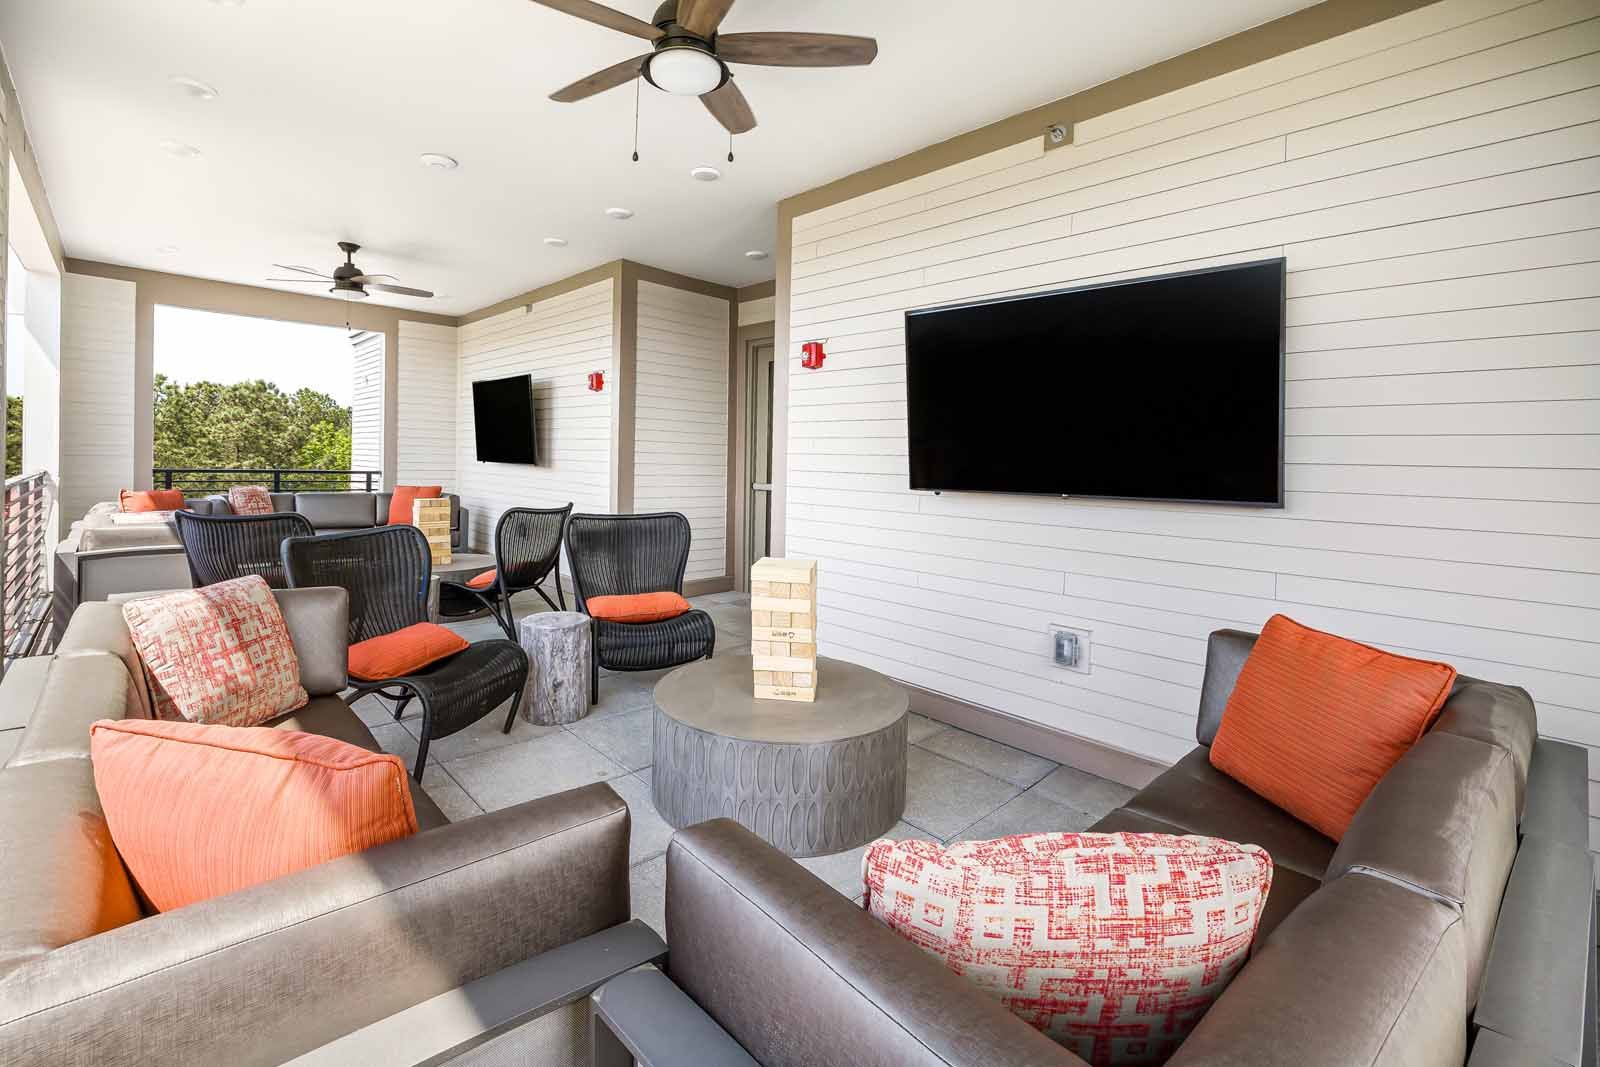 Outdoor lounge area with mounted tvs and fans